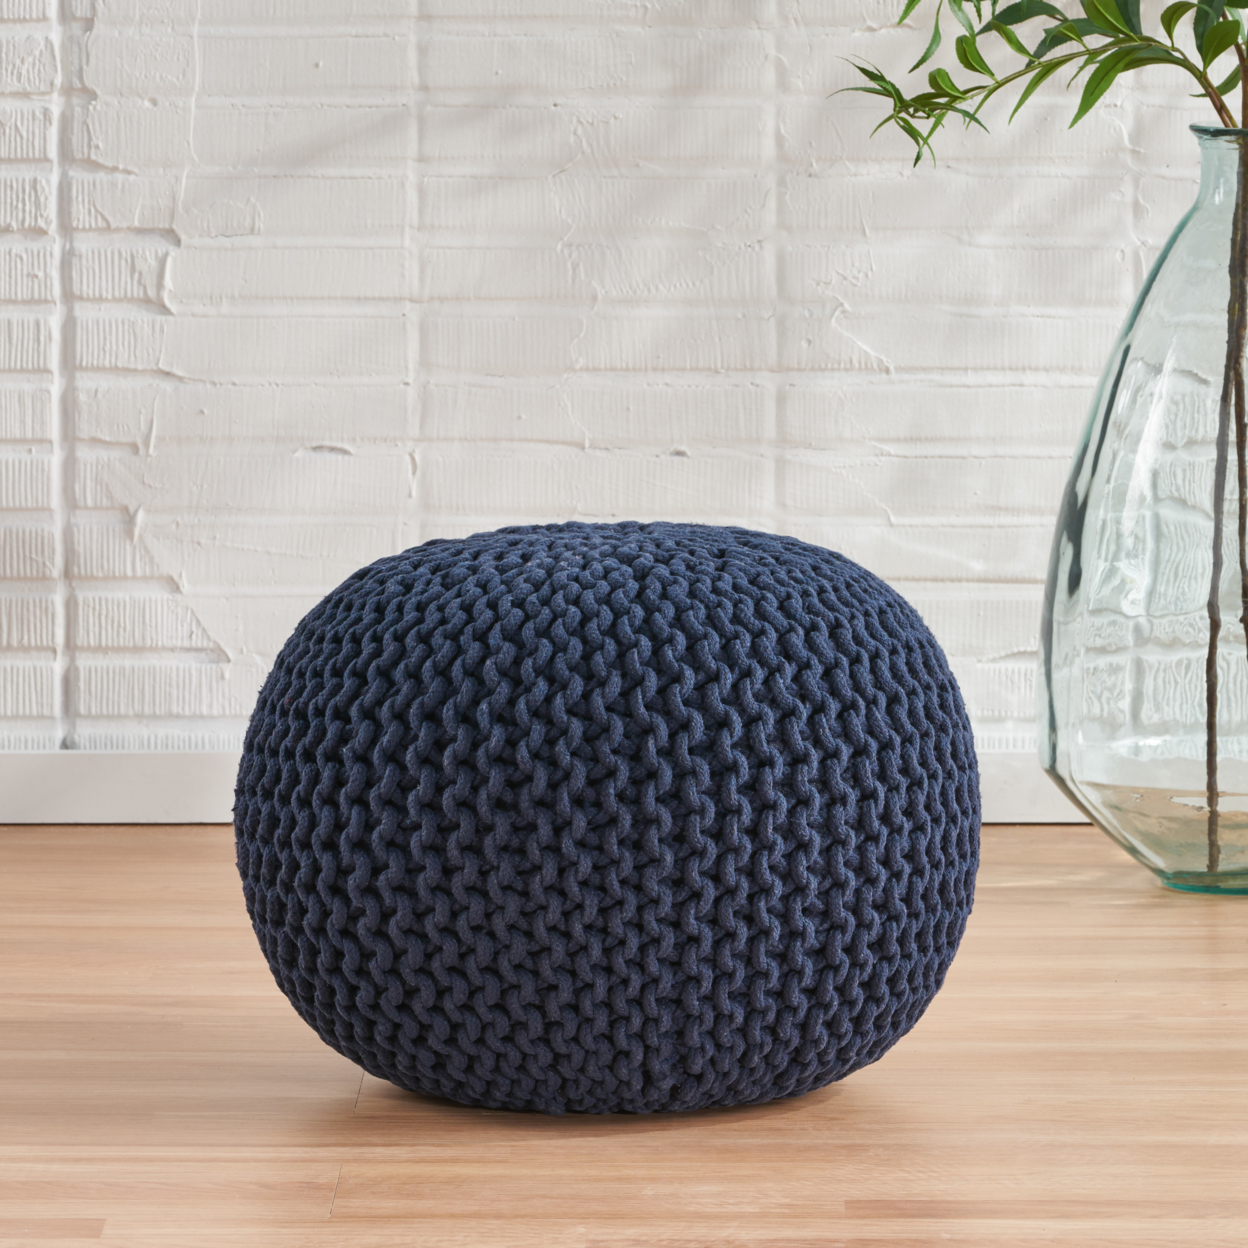 Poona Hand Knitted Artisan Pouf Ottomans - Navy